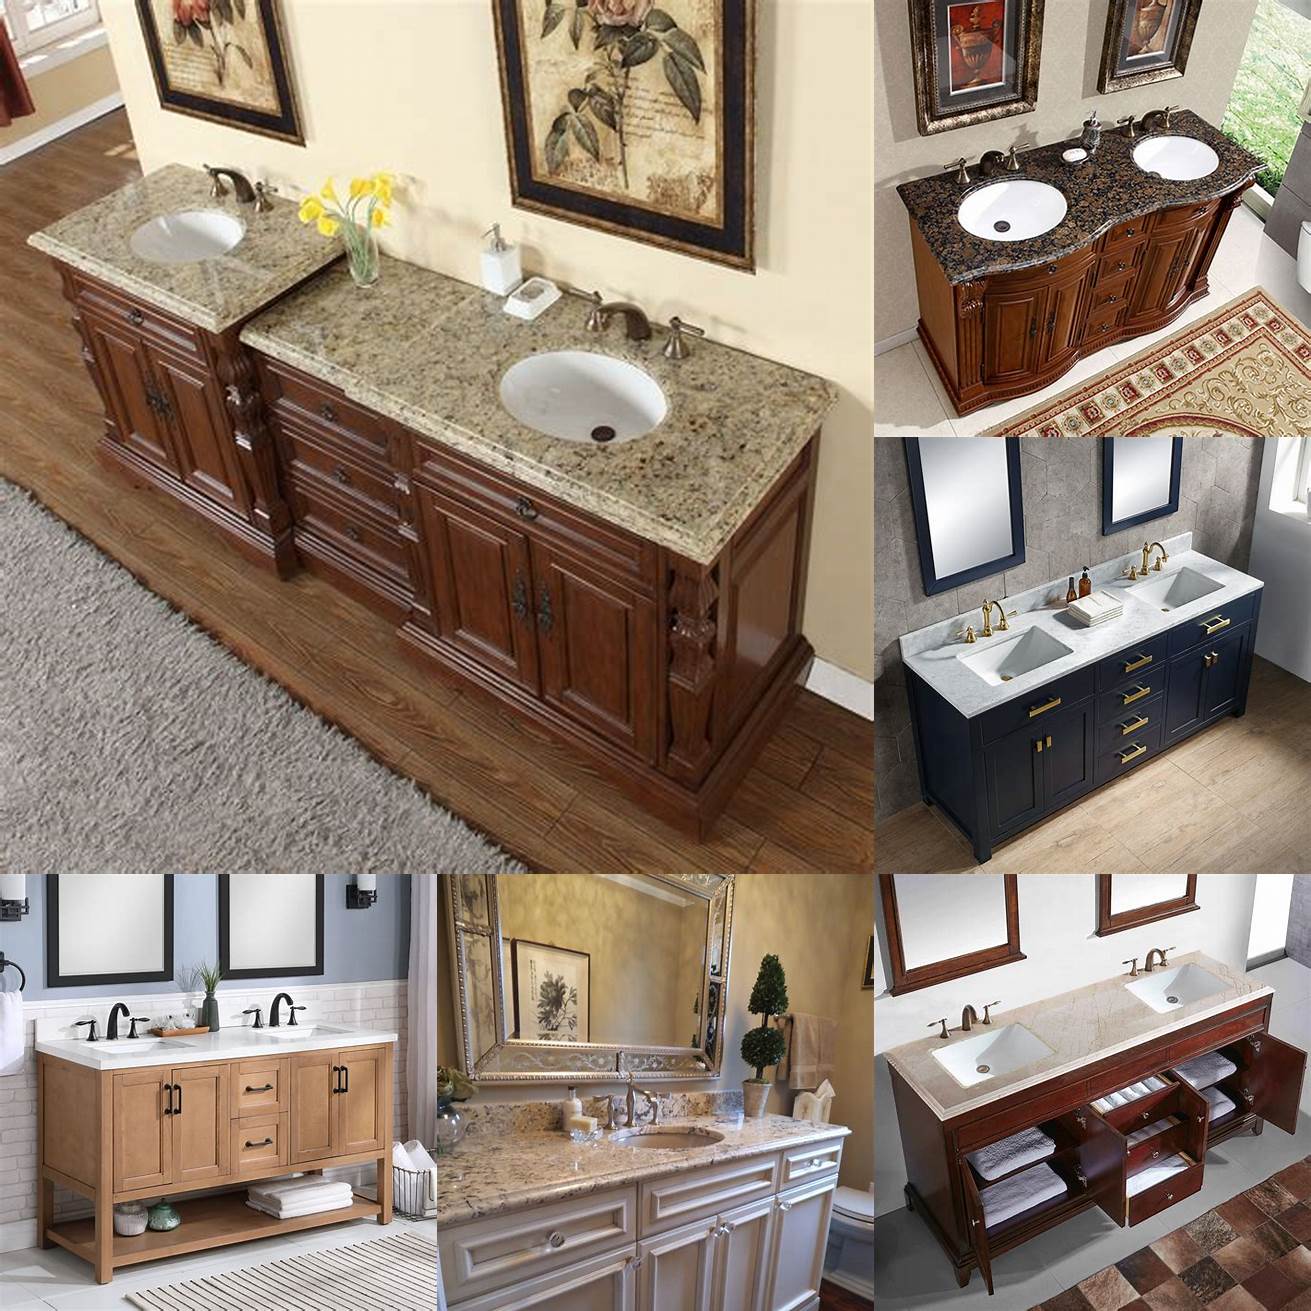 Image A double sink vanity with wooden cabinets and granite countertop